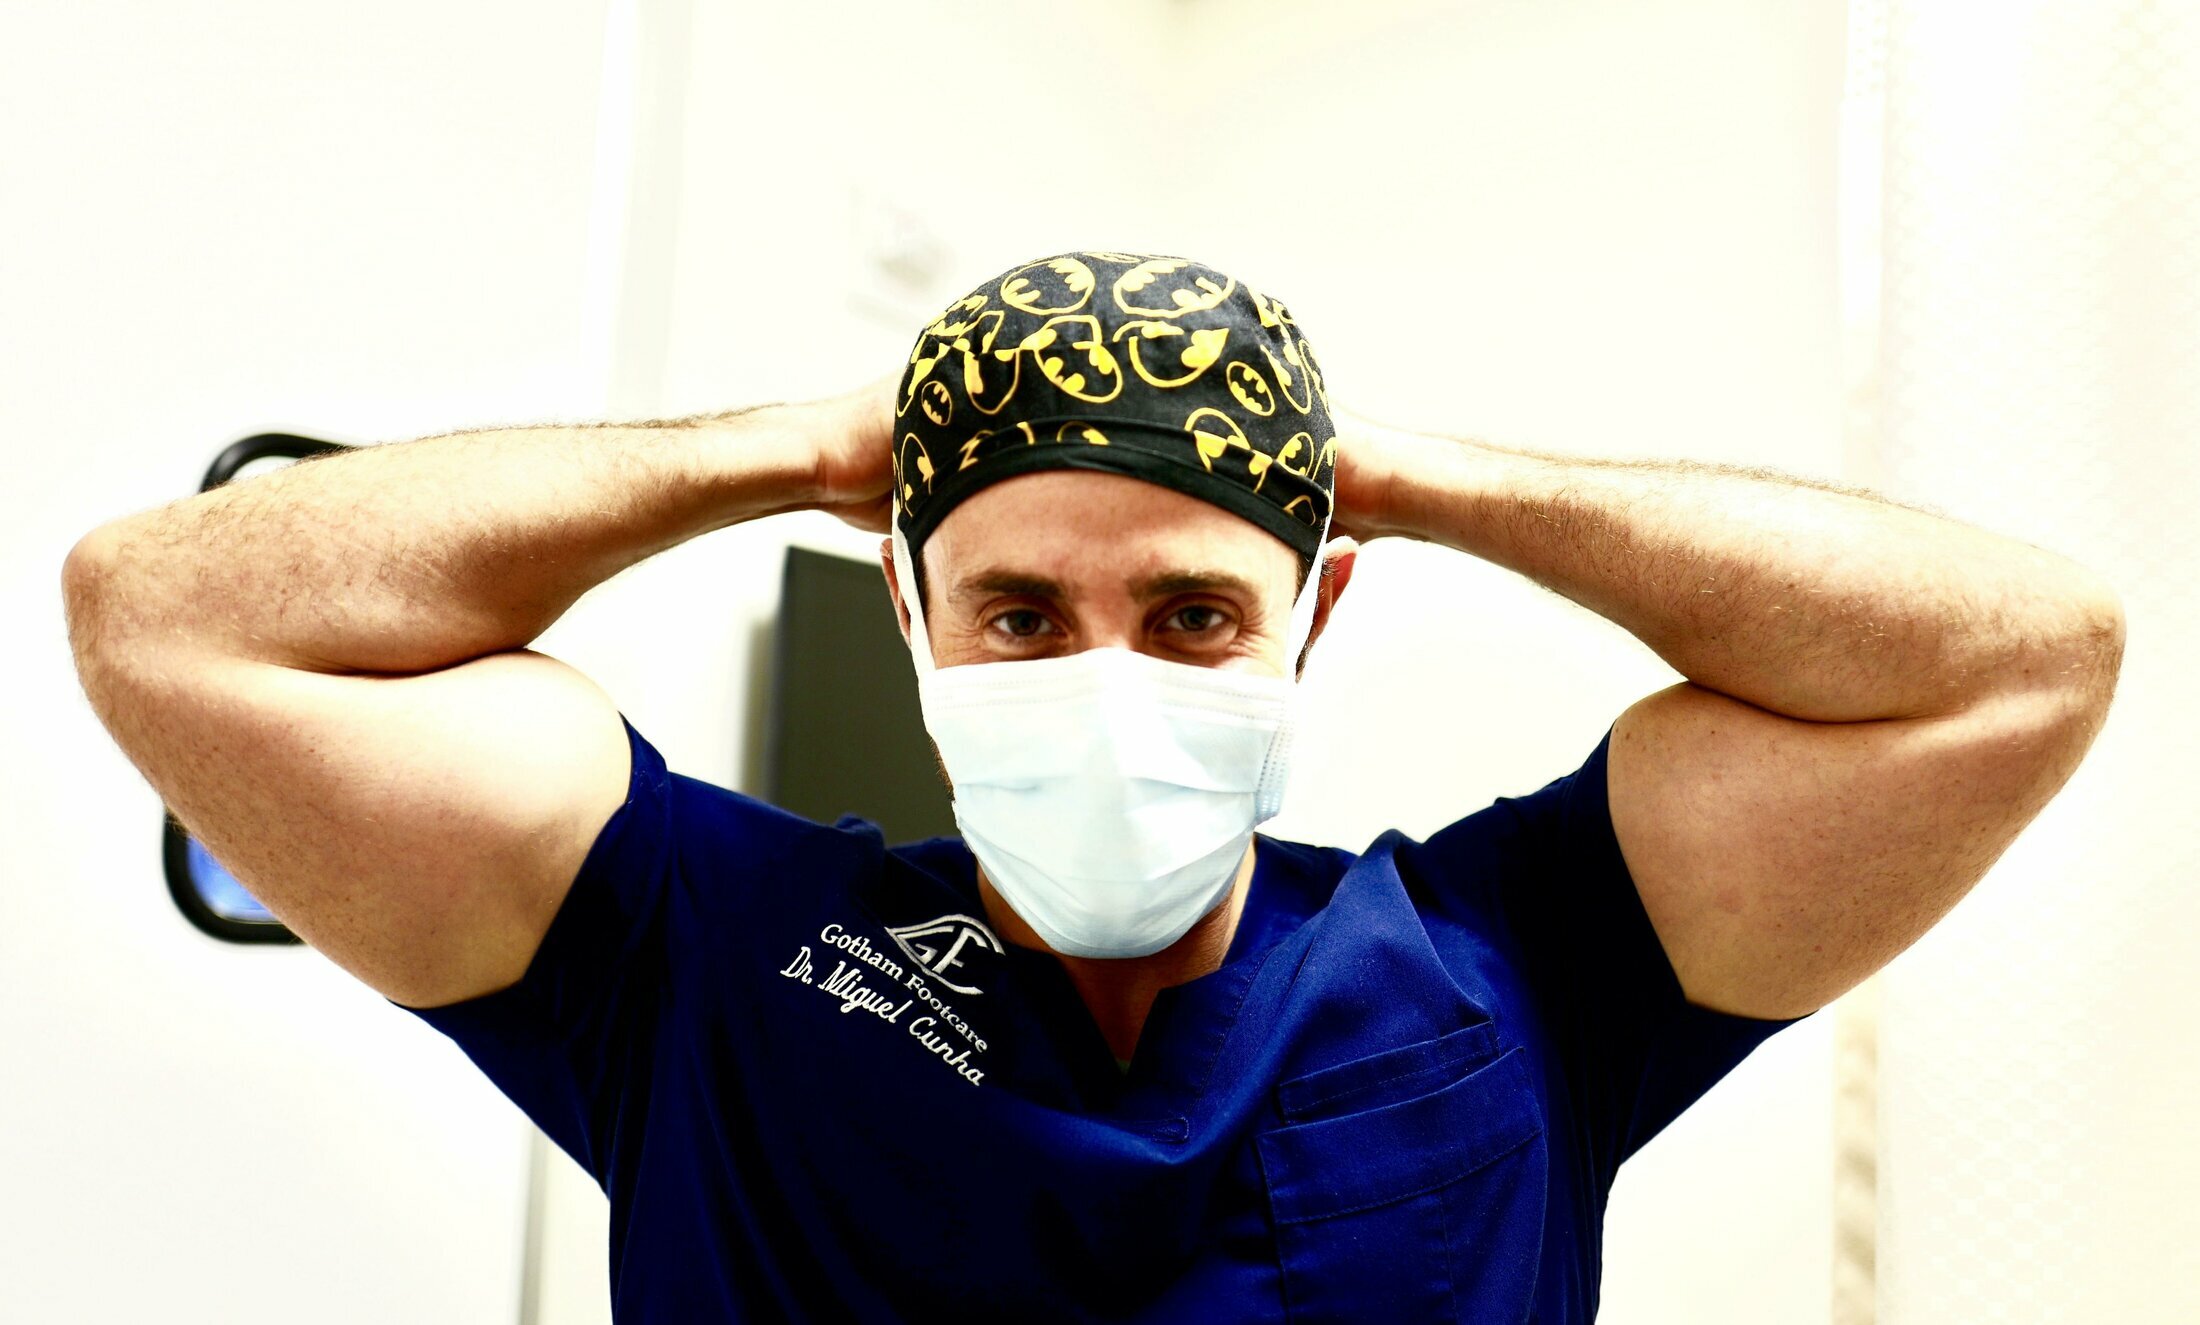 Dr. Cunha wearing surgical mask